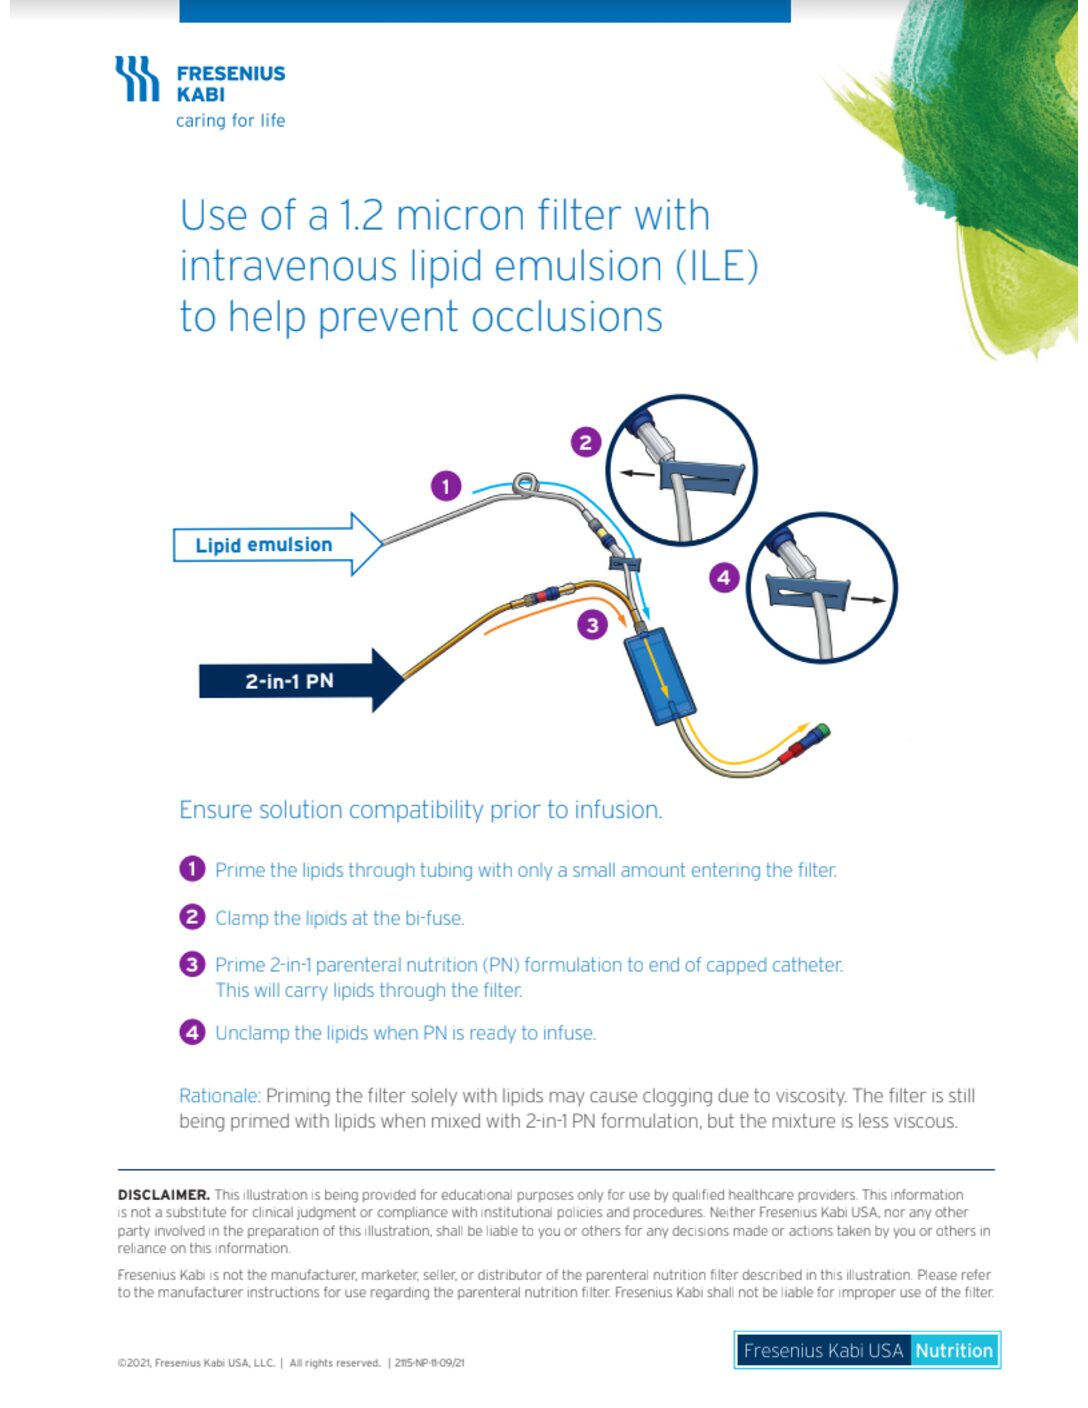 Filter Instructions for Use with Intravenous Lipid Emulsions (ILEs)